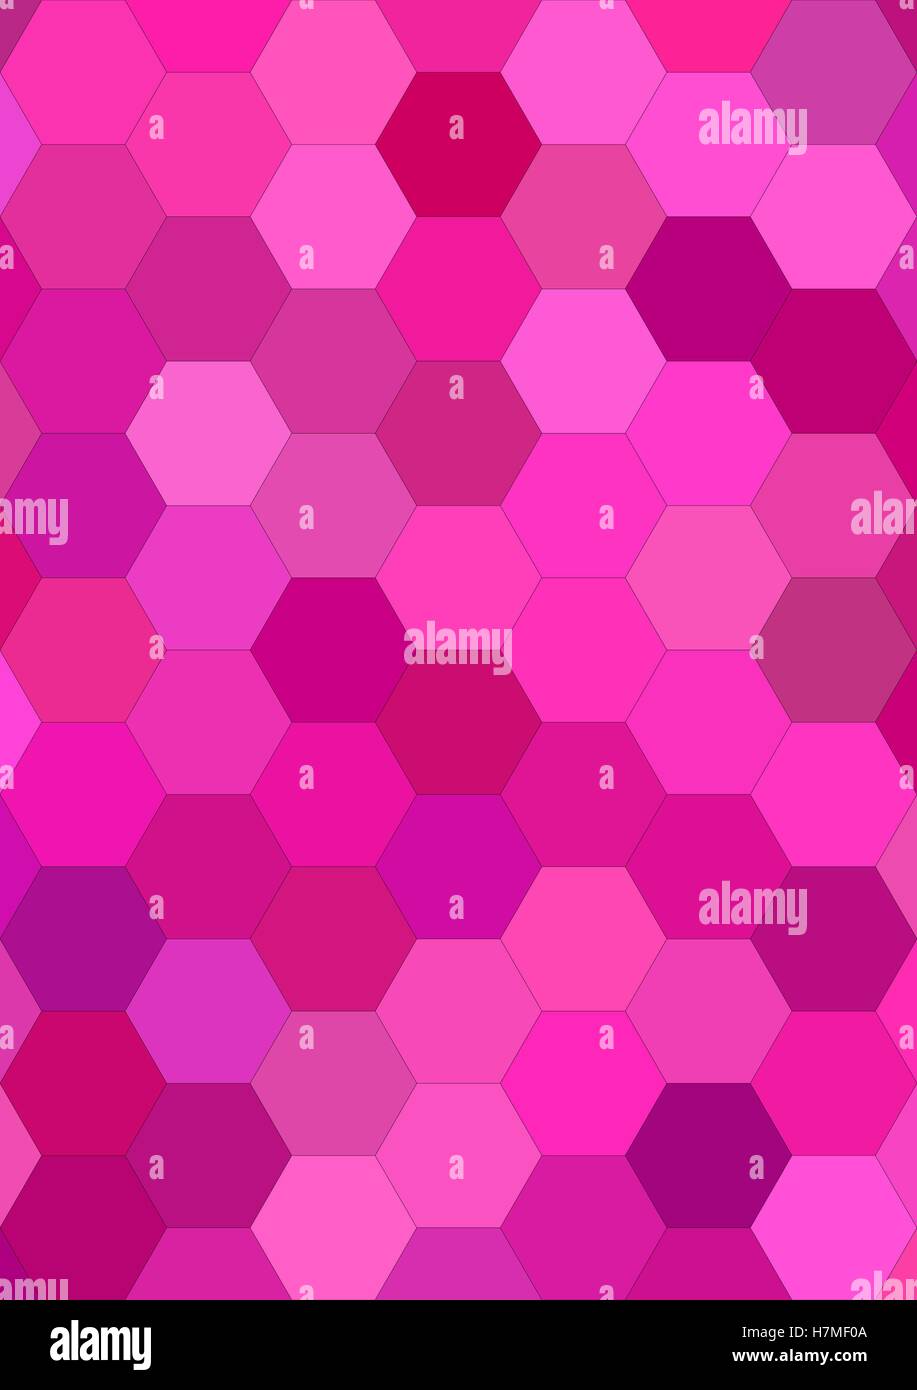 Pink abstract hexagonal tile mosaic background Stock Vector